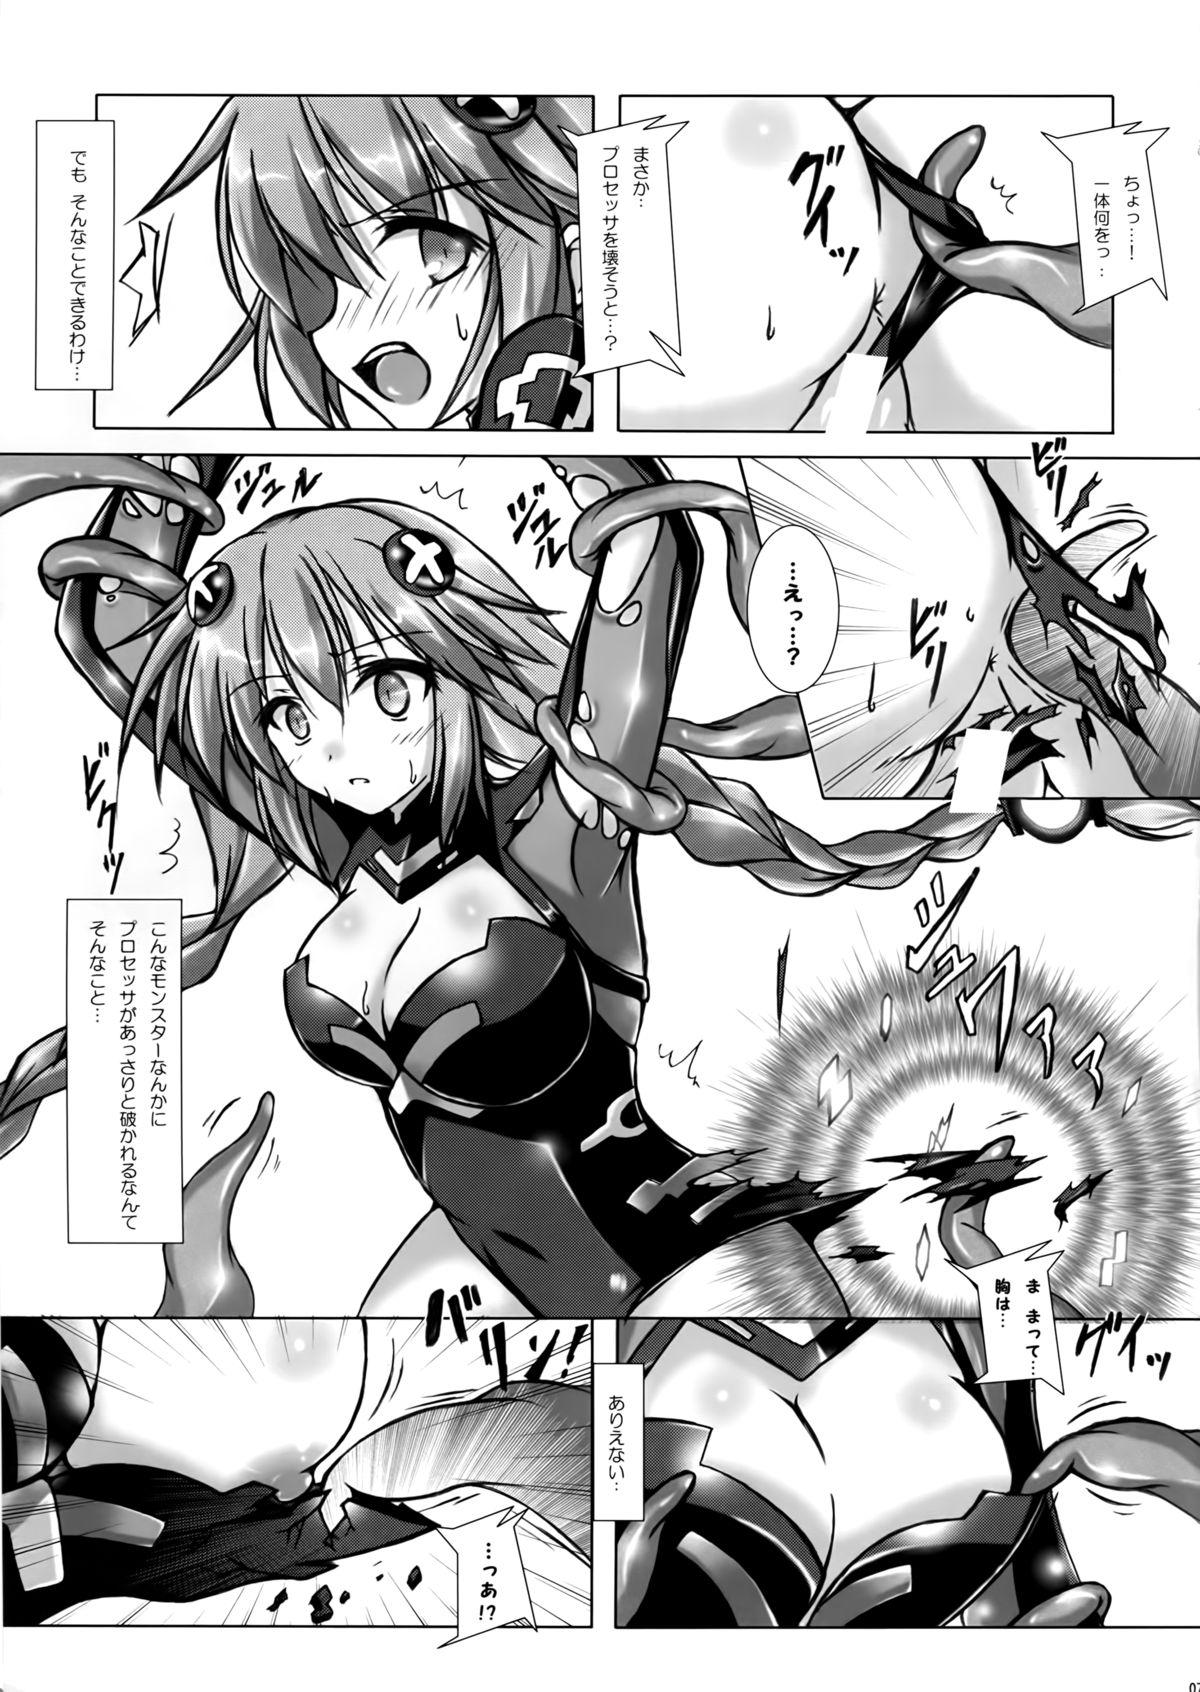 Twink Tentacle Syndrome - Hyperdimension neptunia Bigdick - Page 7